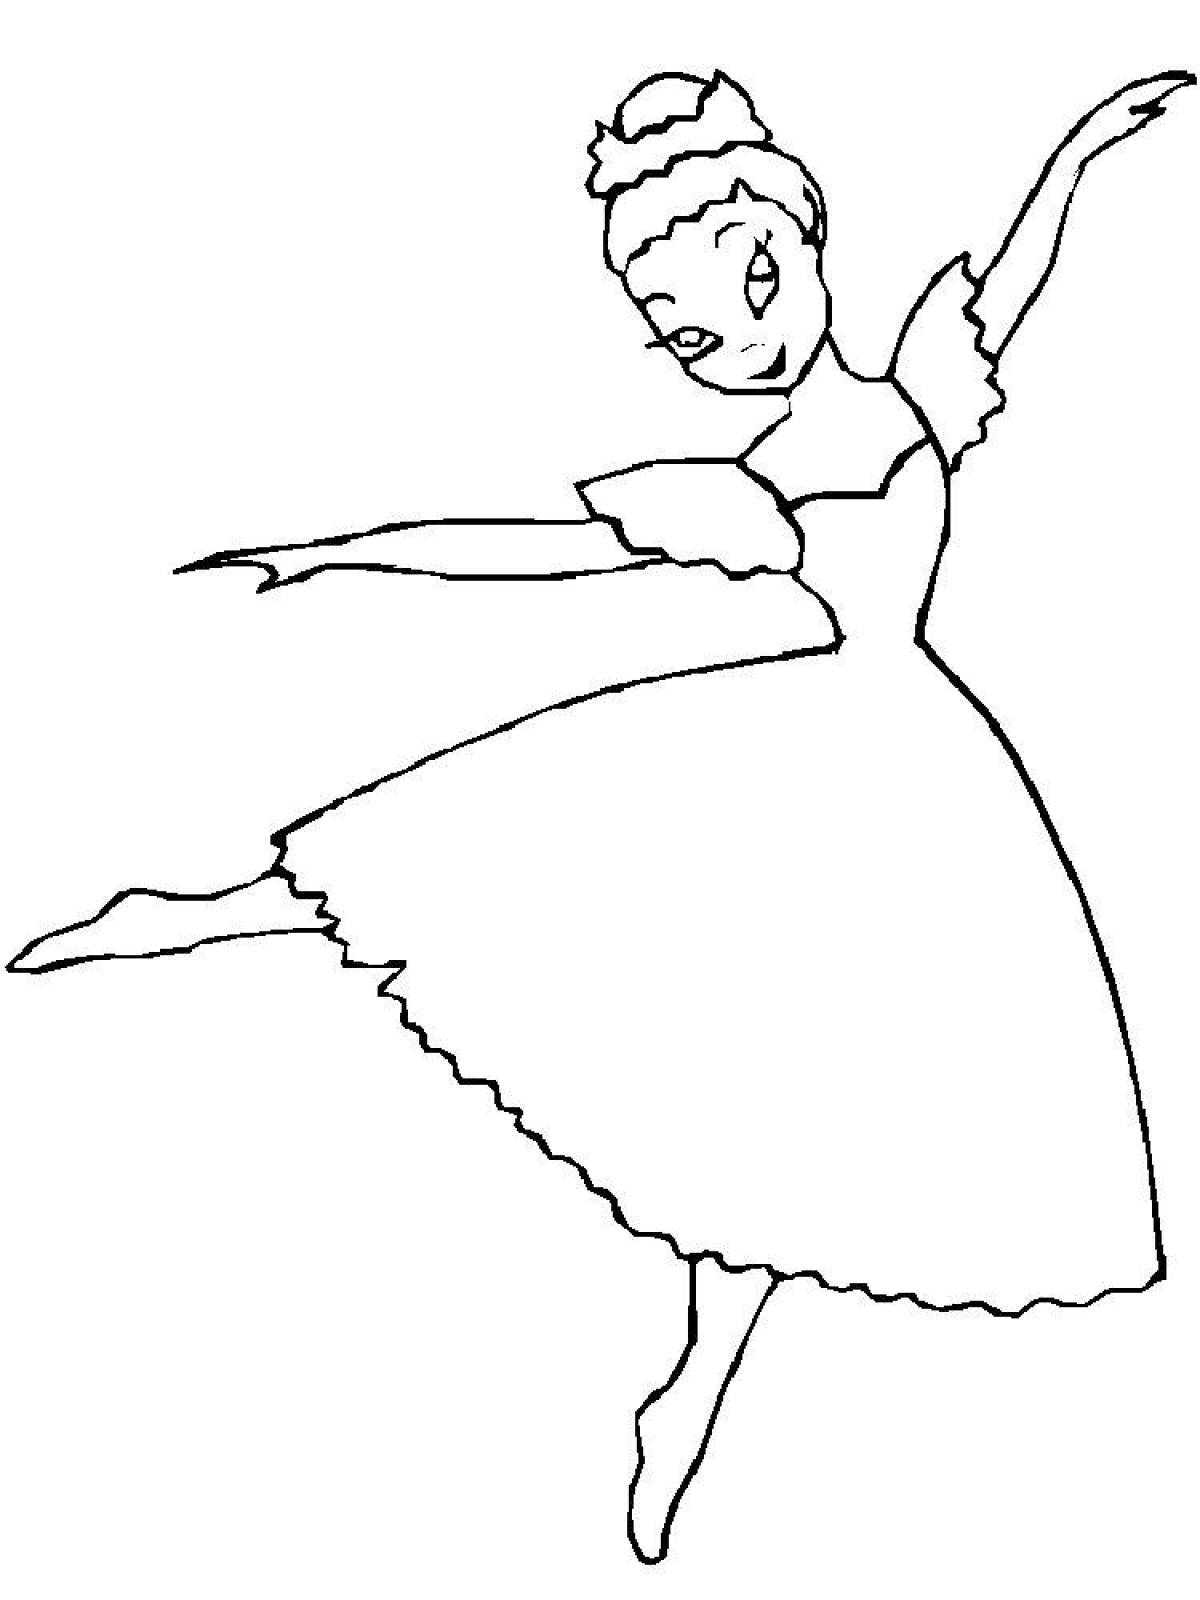 Cute ballerina coloring pages for kids